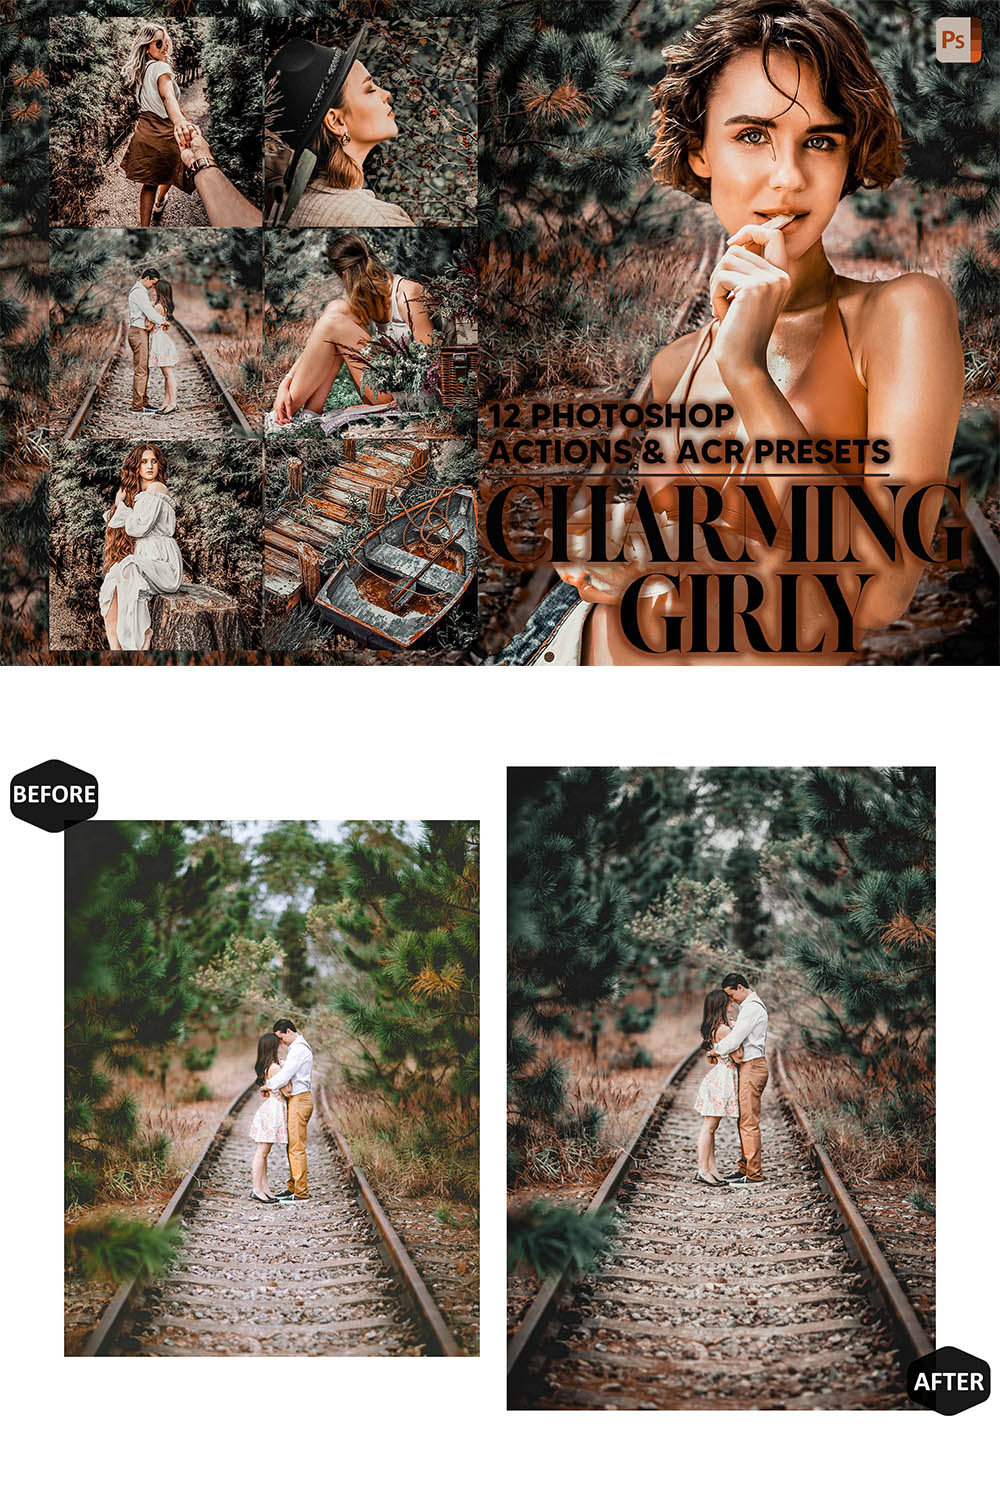 12 Photoshop Actions, Charming Girly Ps Action, Moody ACR Preset, Warm Nature Ps Filter, Atn Portrait And Lifestyle Theme Instagram, Blogger pinterest preview image.